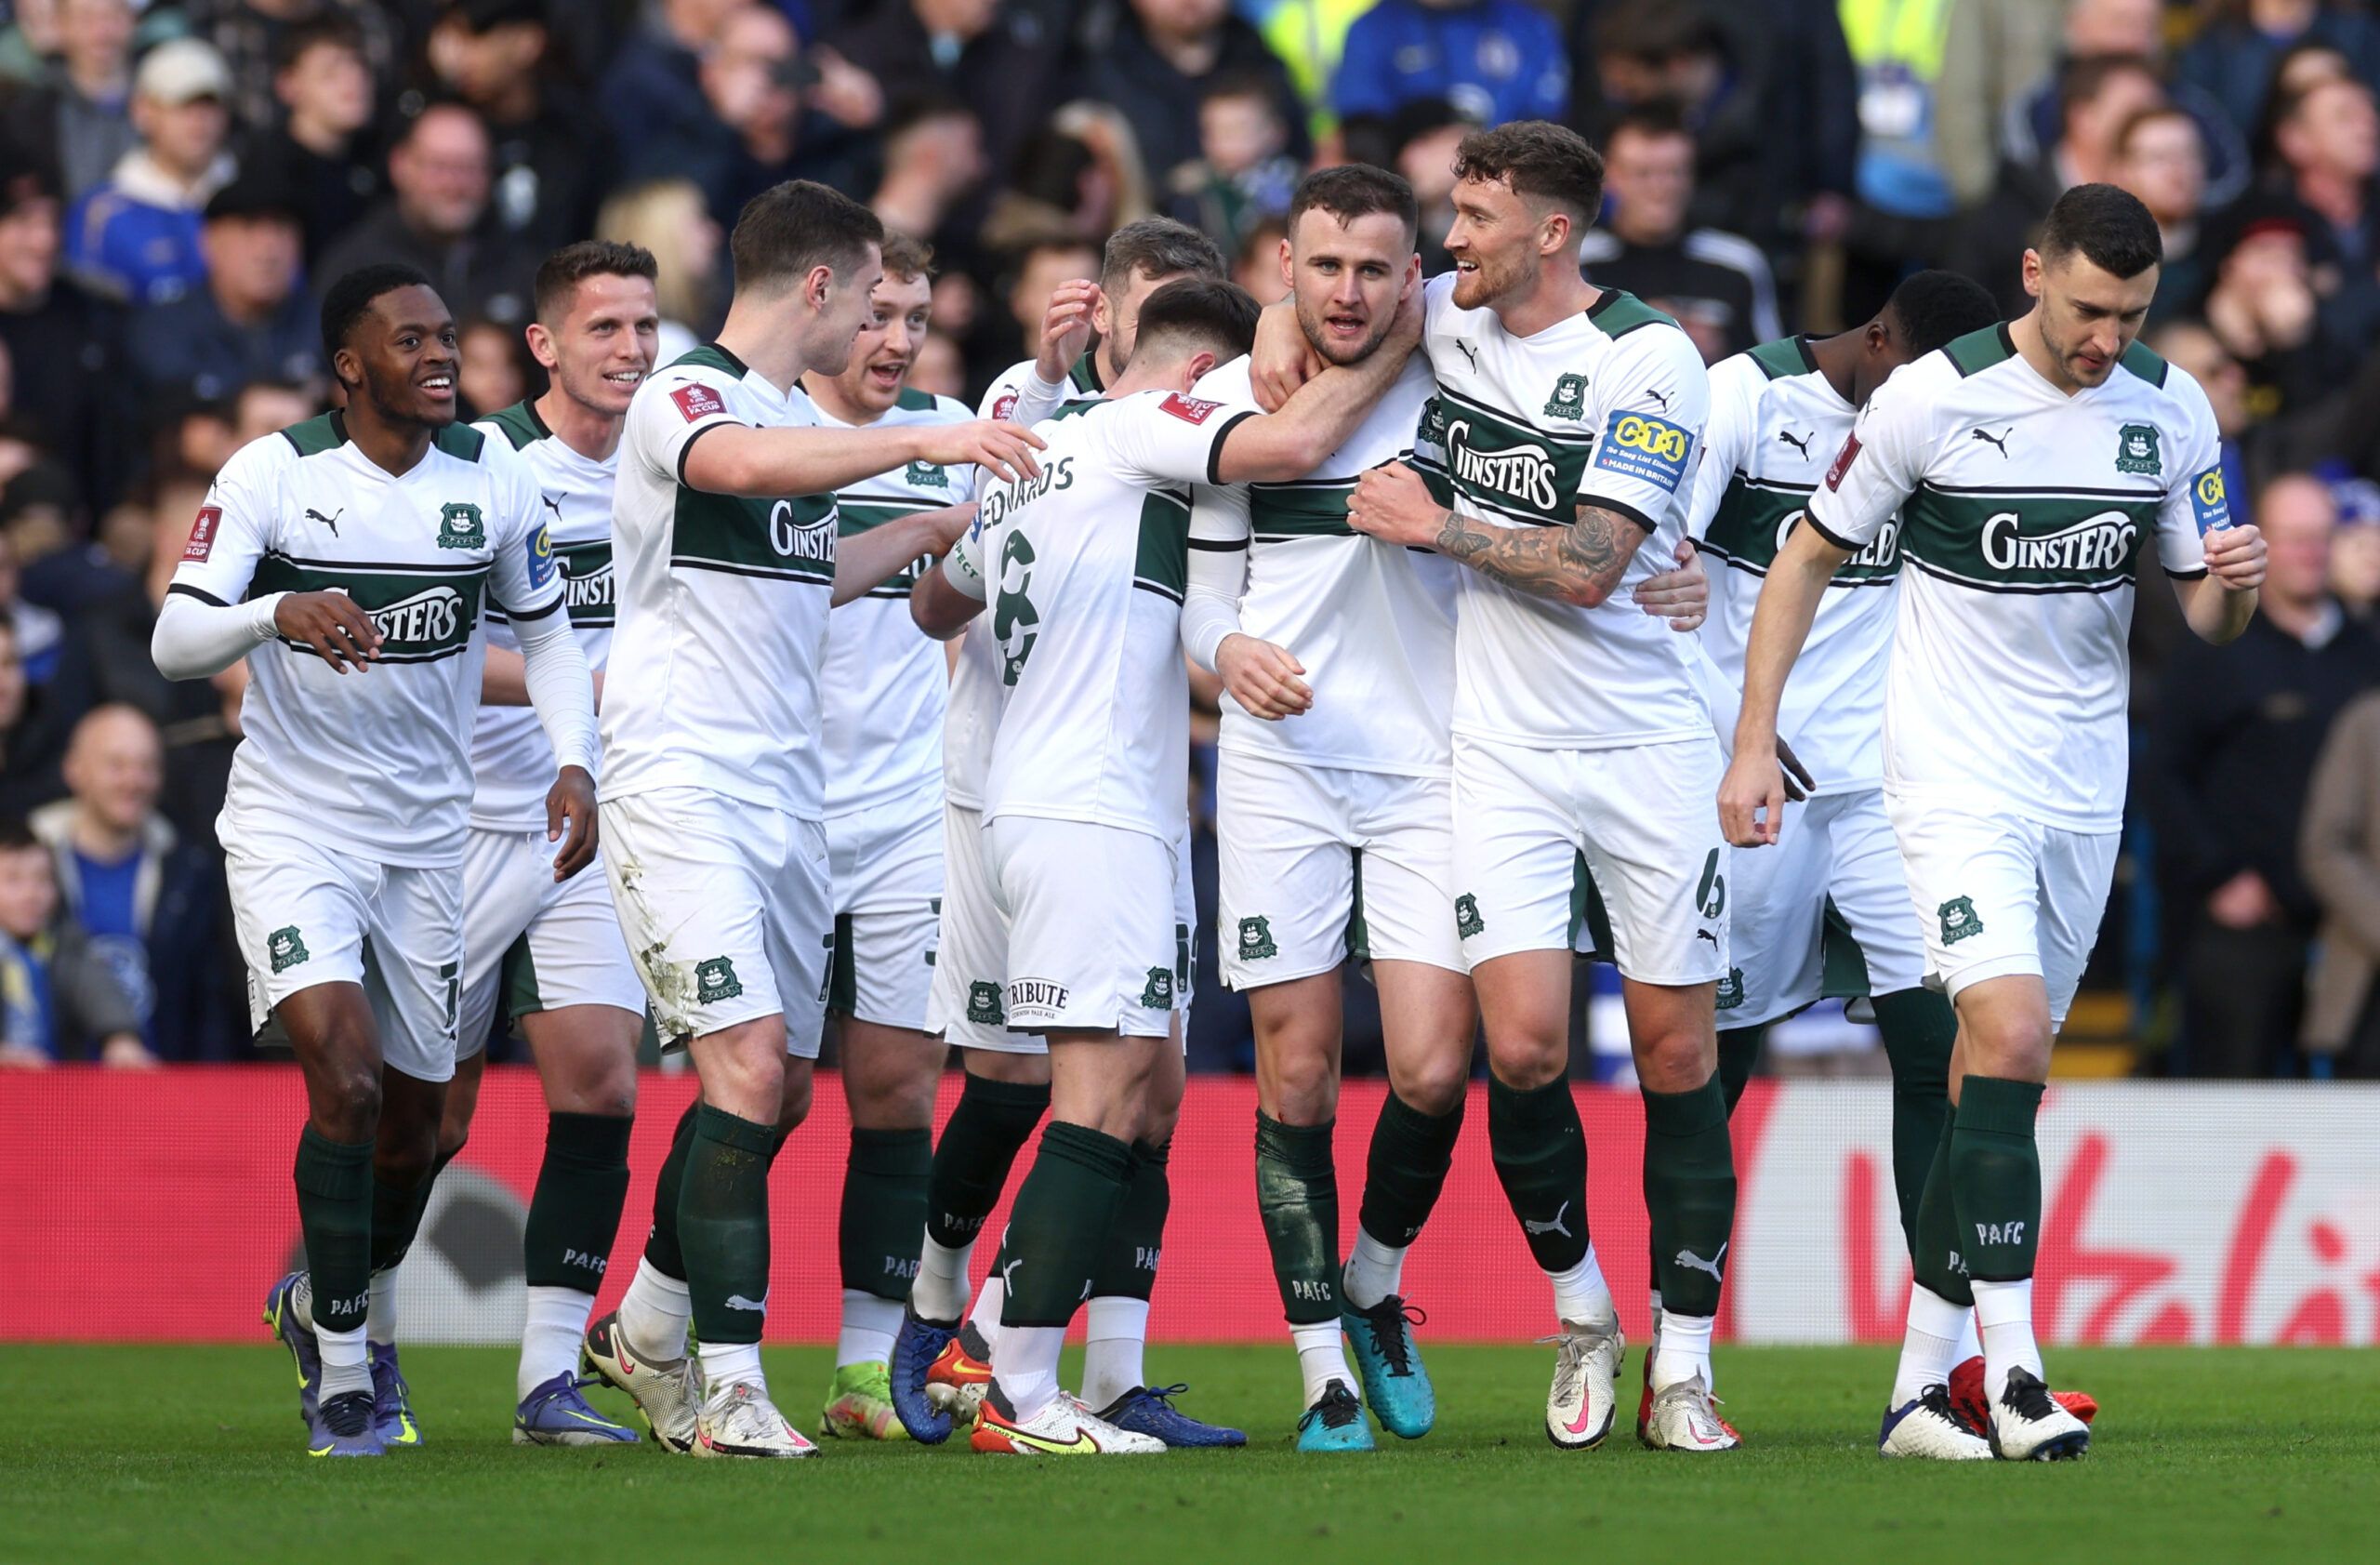 Soccer Football - FA Cup - Fourth Round - Chelsea v Plymouth Argyle - Stamford Bridge, London, Britain - February 5, 2022 Plymouth Argyle's Macaulay Gillesphey celebrates scoring their first goal with teammates Action Images via Reuters/Paul Childs